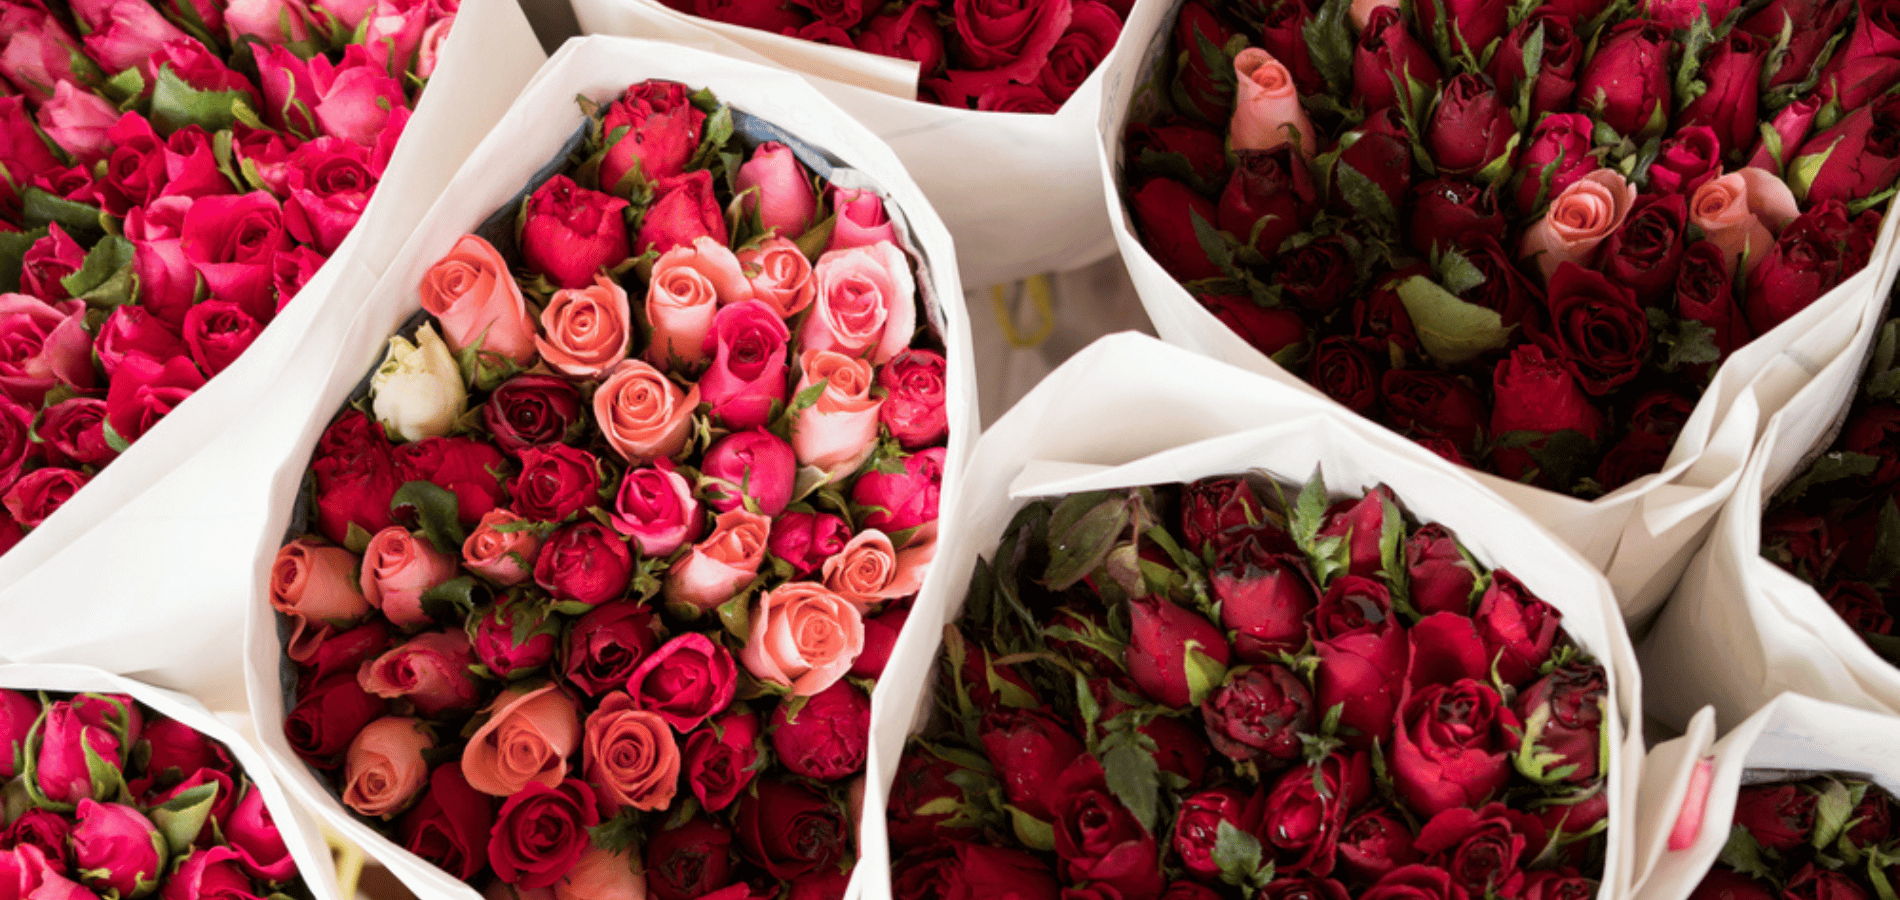 Share the Love with Fair Roses-FairChange Blog Valentine's Day